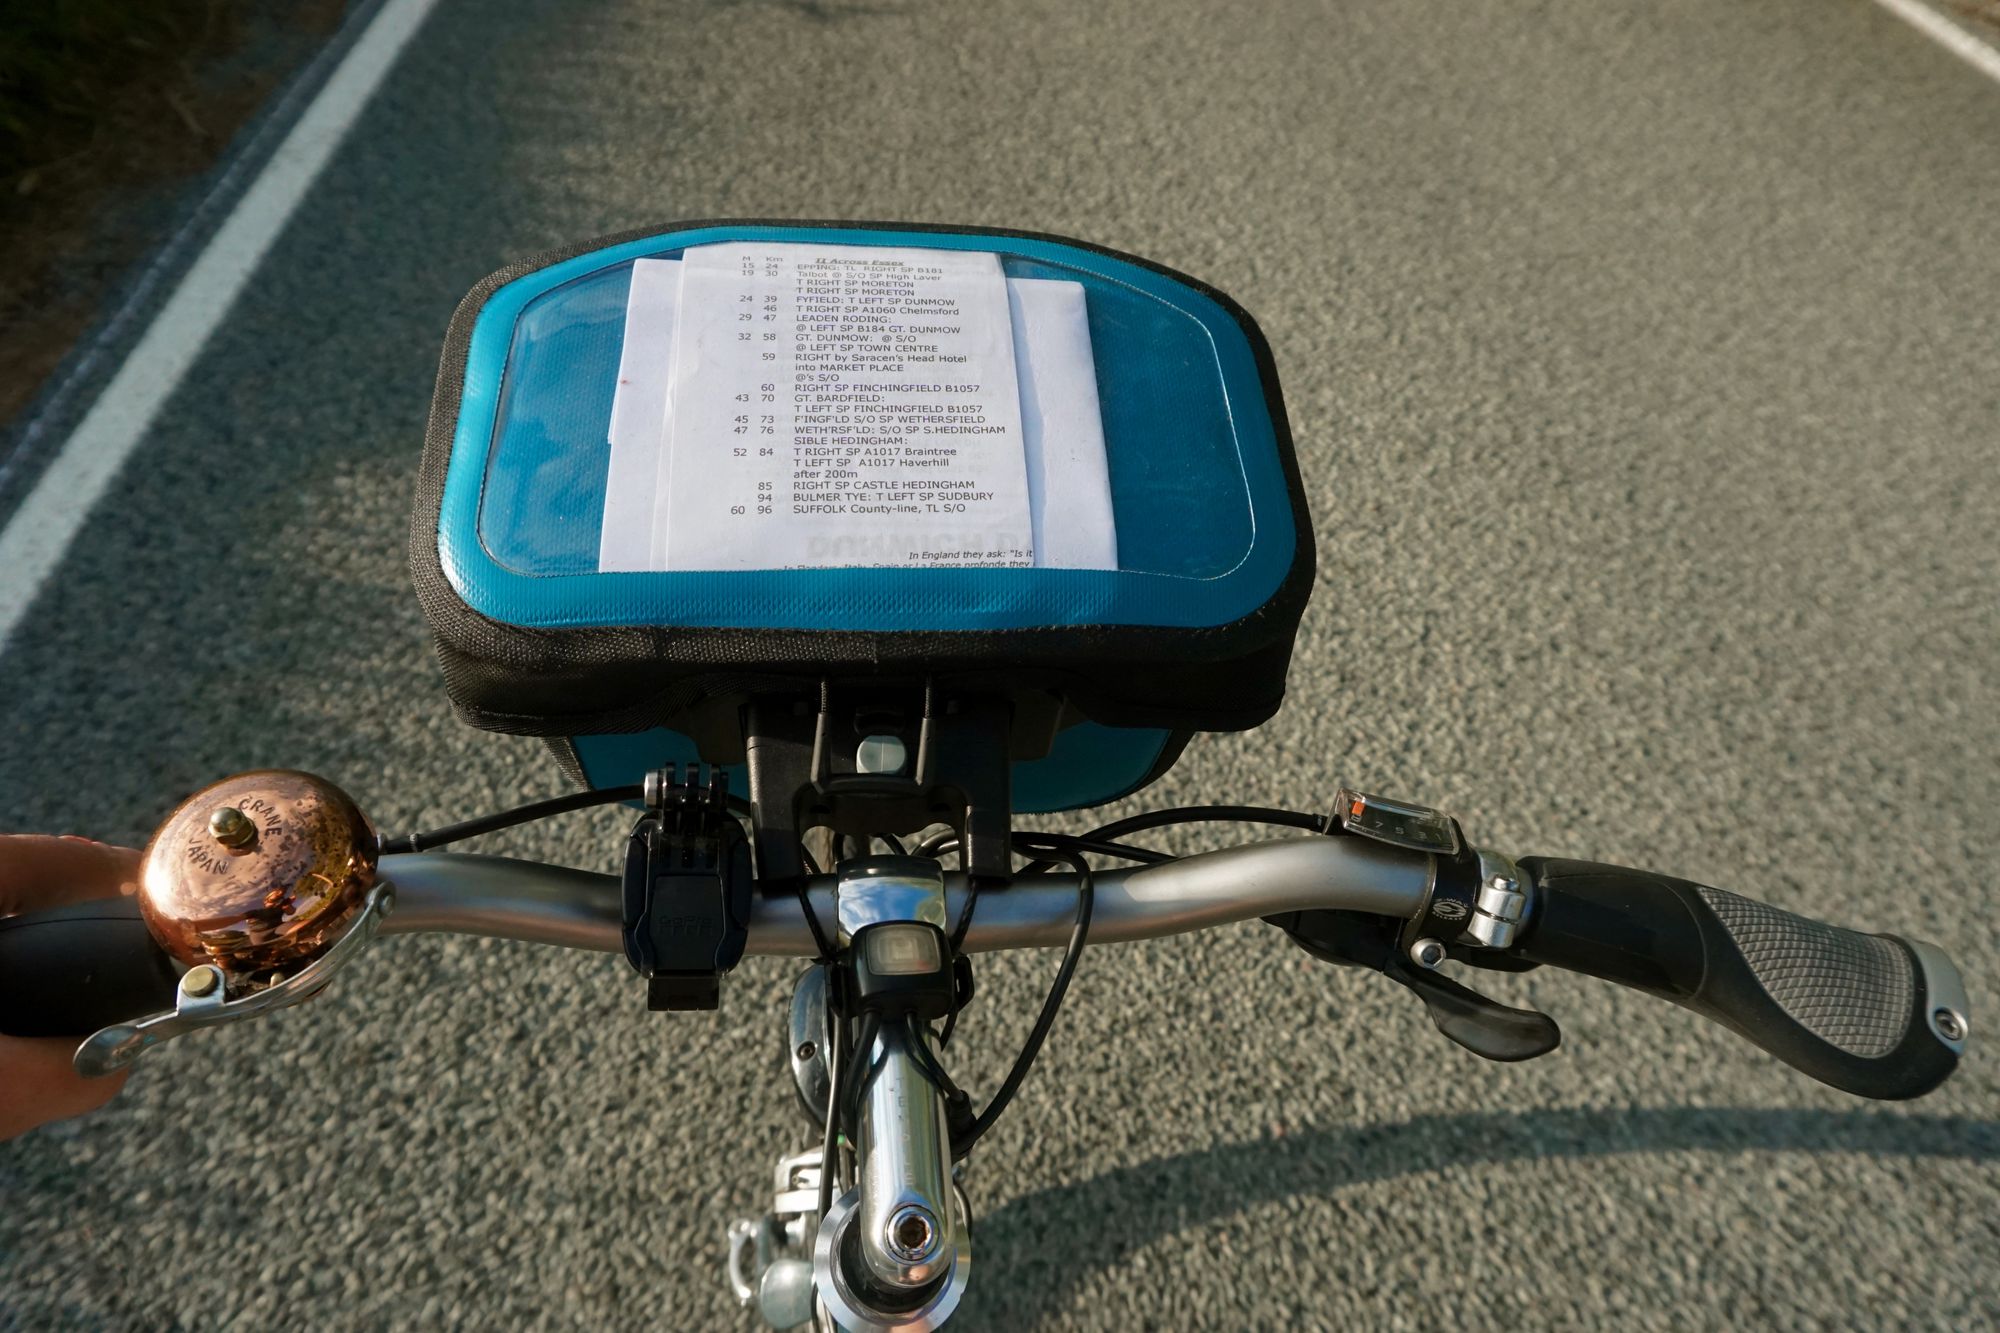 Shot from the saddle of a flat-handlebar bicycle's cockpit with a bronze Crane bell, rubber grips, and a blue handlebar bag. Inside the bar bag is a route sheet. It reads: II Across Essex 15 miles 24km EPPING: TL RIGHT SP B181 19 miles 30 km Talbot @ S/O SP High Laver T RIGHT SP MORETON T RIGHT SP MORETON 24 miles 39 km FYFIELD: T LEFT SP DUNMOW 46 km T RIGHT SP A1060 Chelmsford 29 miles 47 km LEADEN RODING: @ LEFT SP B184 GT. DUNMOW 32 miles 58 km GT. DUNMOW: @ S/O @ LEFT SP TOWN CENTRE 59 km RIGHT by Saracen's Head Hotel into MARKET PLACE @'s S/O 60 km RIGHT SP FINCHINGFIELD B1057 43 miles 70 km GT. BARDFIELD: T LEFT SP FINCHINGFIELD B1057 45 miles 73 km F'INGF'LD S/O SP WETHERSFIELD 47 miles 76 km WETH'RSF'LD: S/O SP S.HEDINGHAM SIBLE HEDINGHAM: 52 miles 84 km T RIGHT SP A1017 Braintree T LEFT SP A1017 Haverhill after 200m 85 km RIGHT SP CASTLE HEDINGHAM 94 km BULMER TYE: T LEFT SP. SUDBURY 60 miles 96 km SUFFOLK County-line, TL S/O